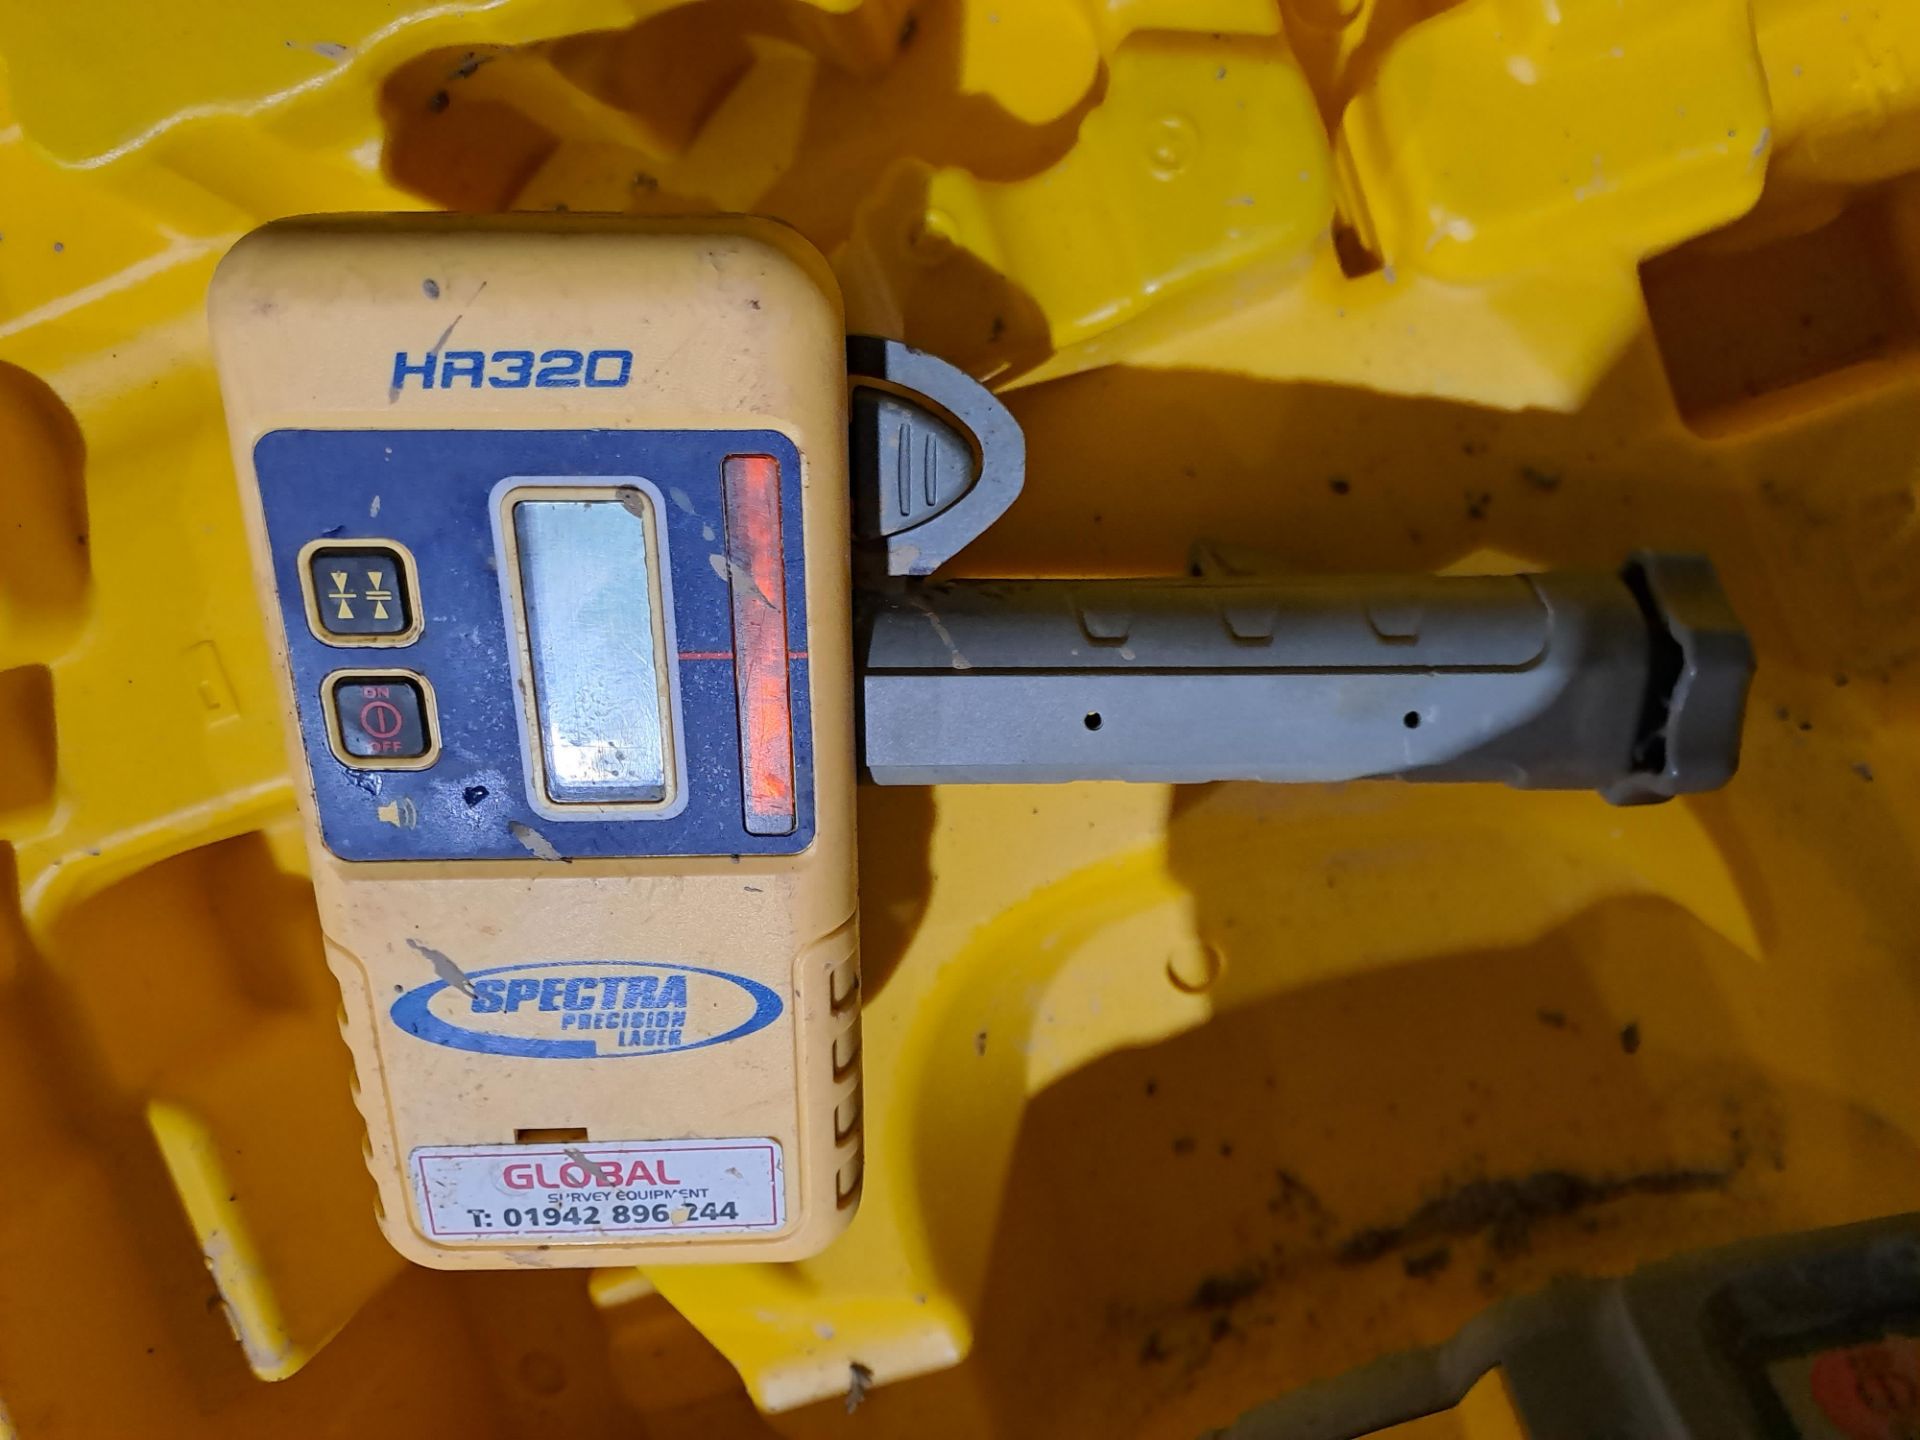 Trimble LL300N Spectra Precision laser level, serial no. 21173438, with Trimble HR320 detector, - Image 3 of 3